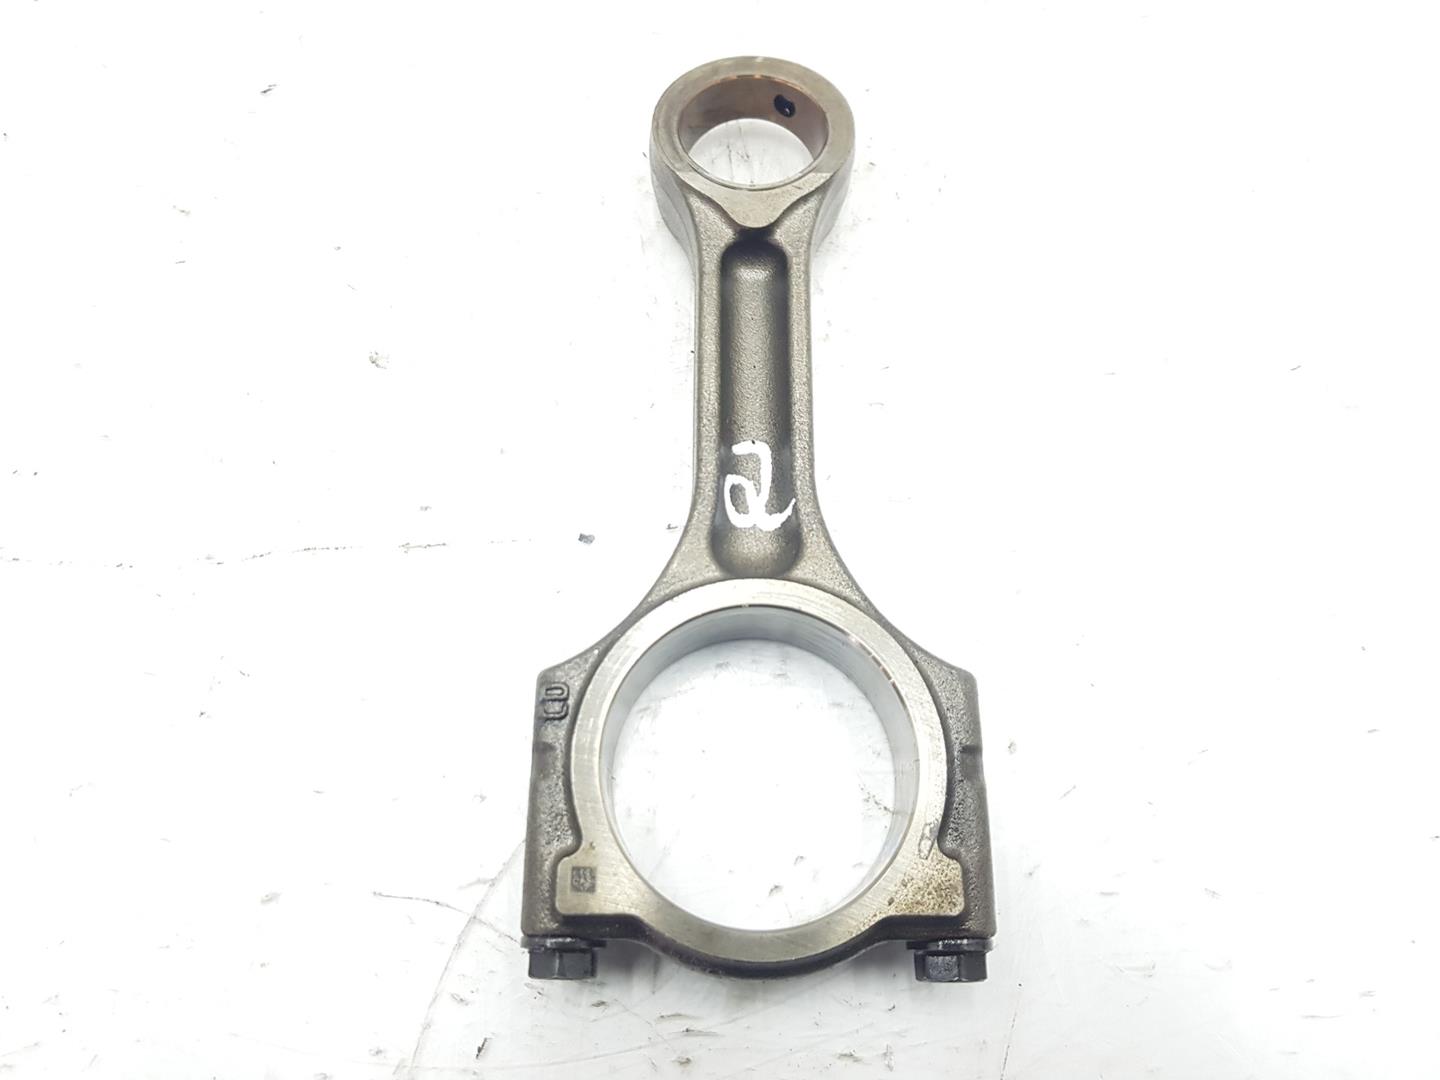 RENAULT Scenic 3 generation (2009-2015) Connecting Rod 121001039R, 121004759R, 1345HD 19797064